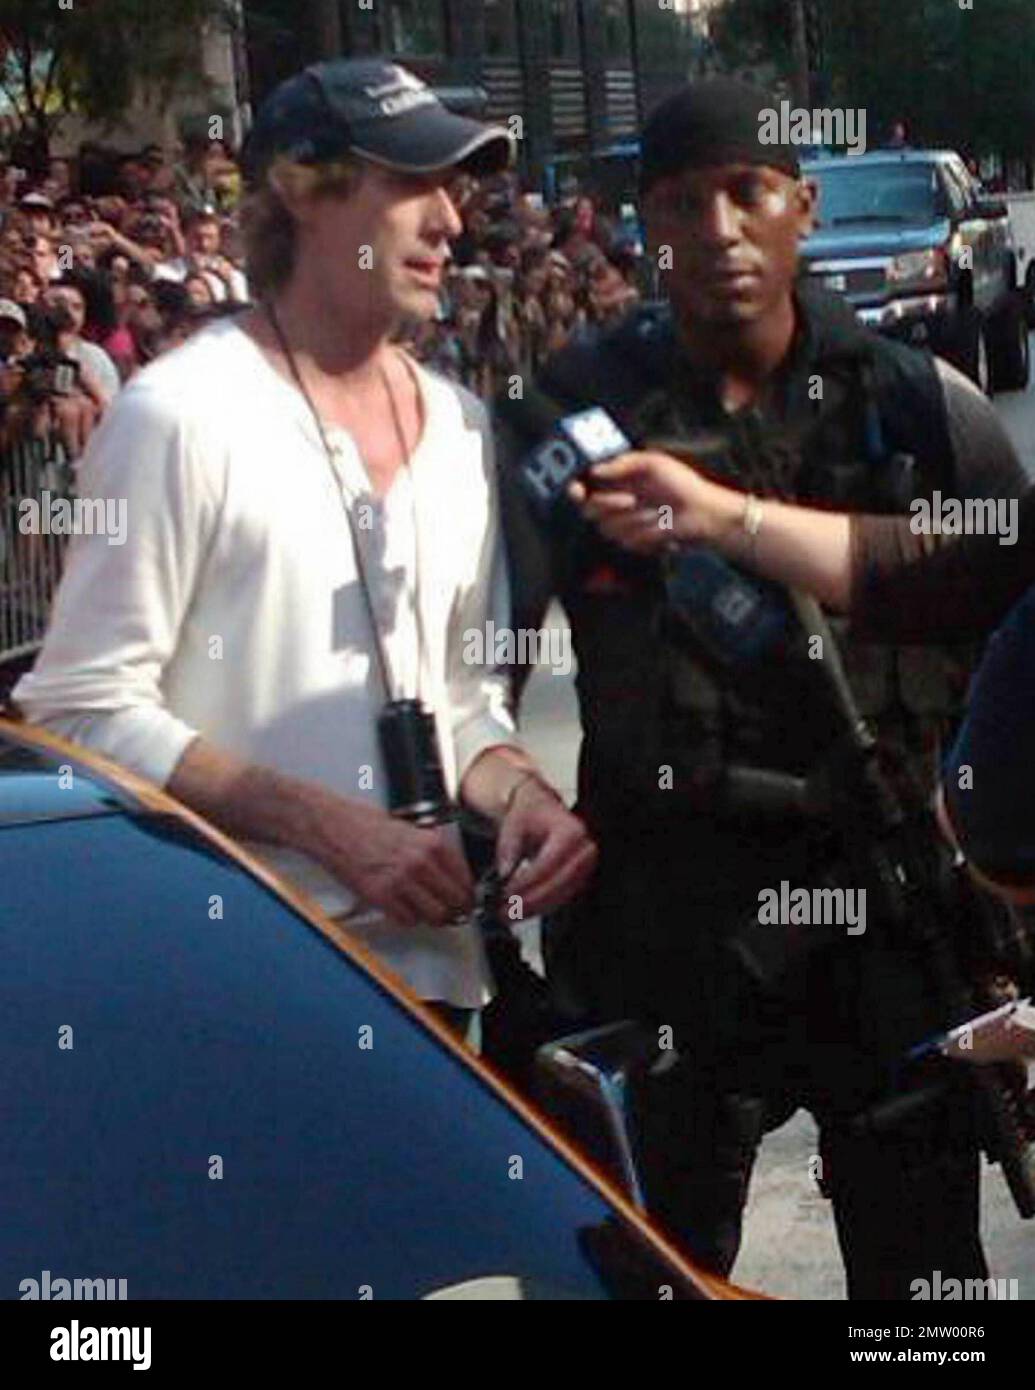 Director Michael Bay and actor Tyrese Gibson talk with the media during a break from filming on the Chicago set of 'Transformers 3'.  Bay, who is rumored to be difficult on set, thanked fans who came out to support them despite the summer heat. Chicago, IL. 07/18/10.   . Stock Photo